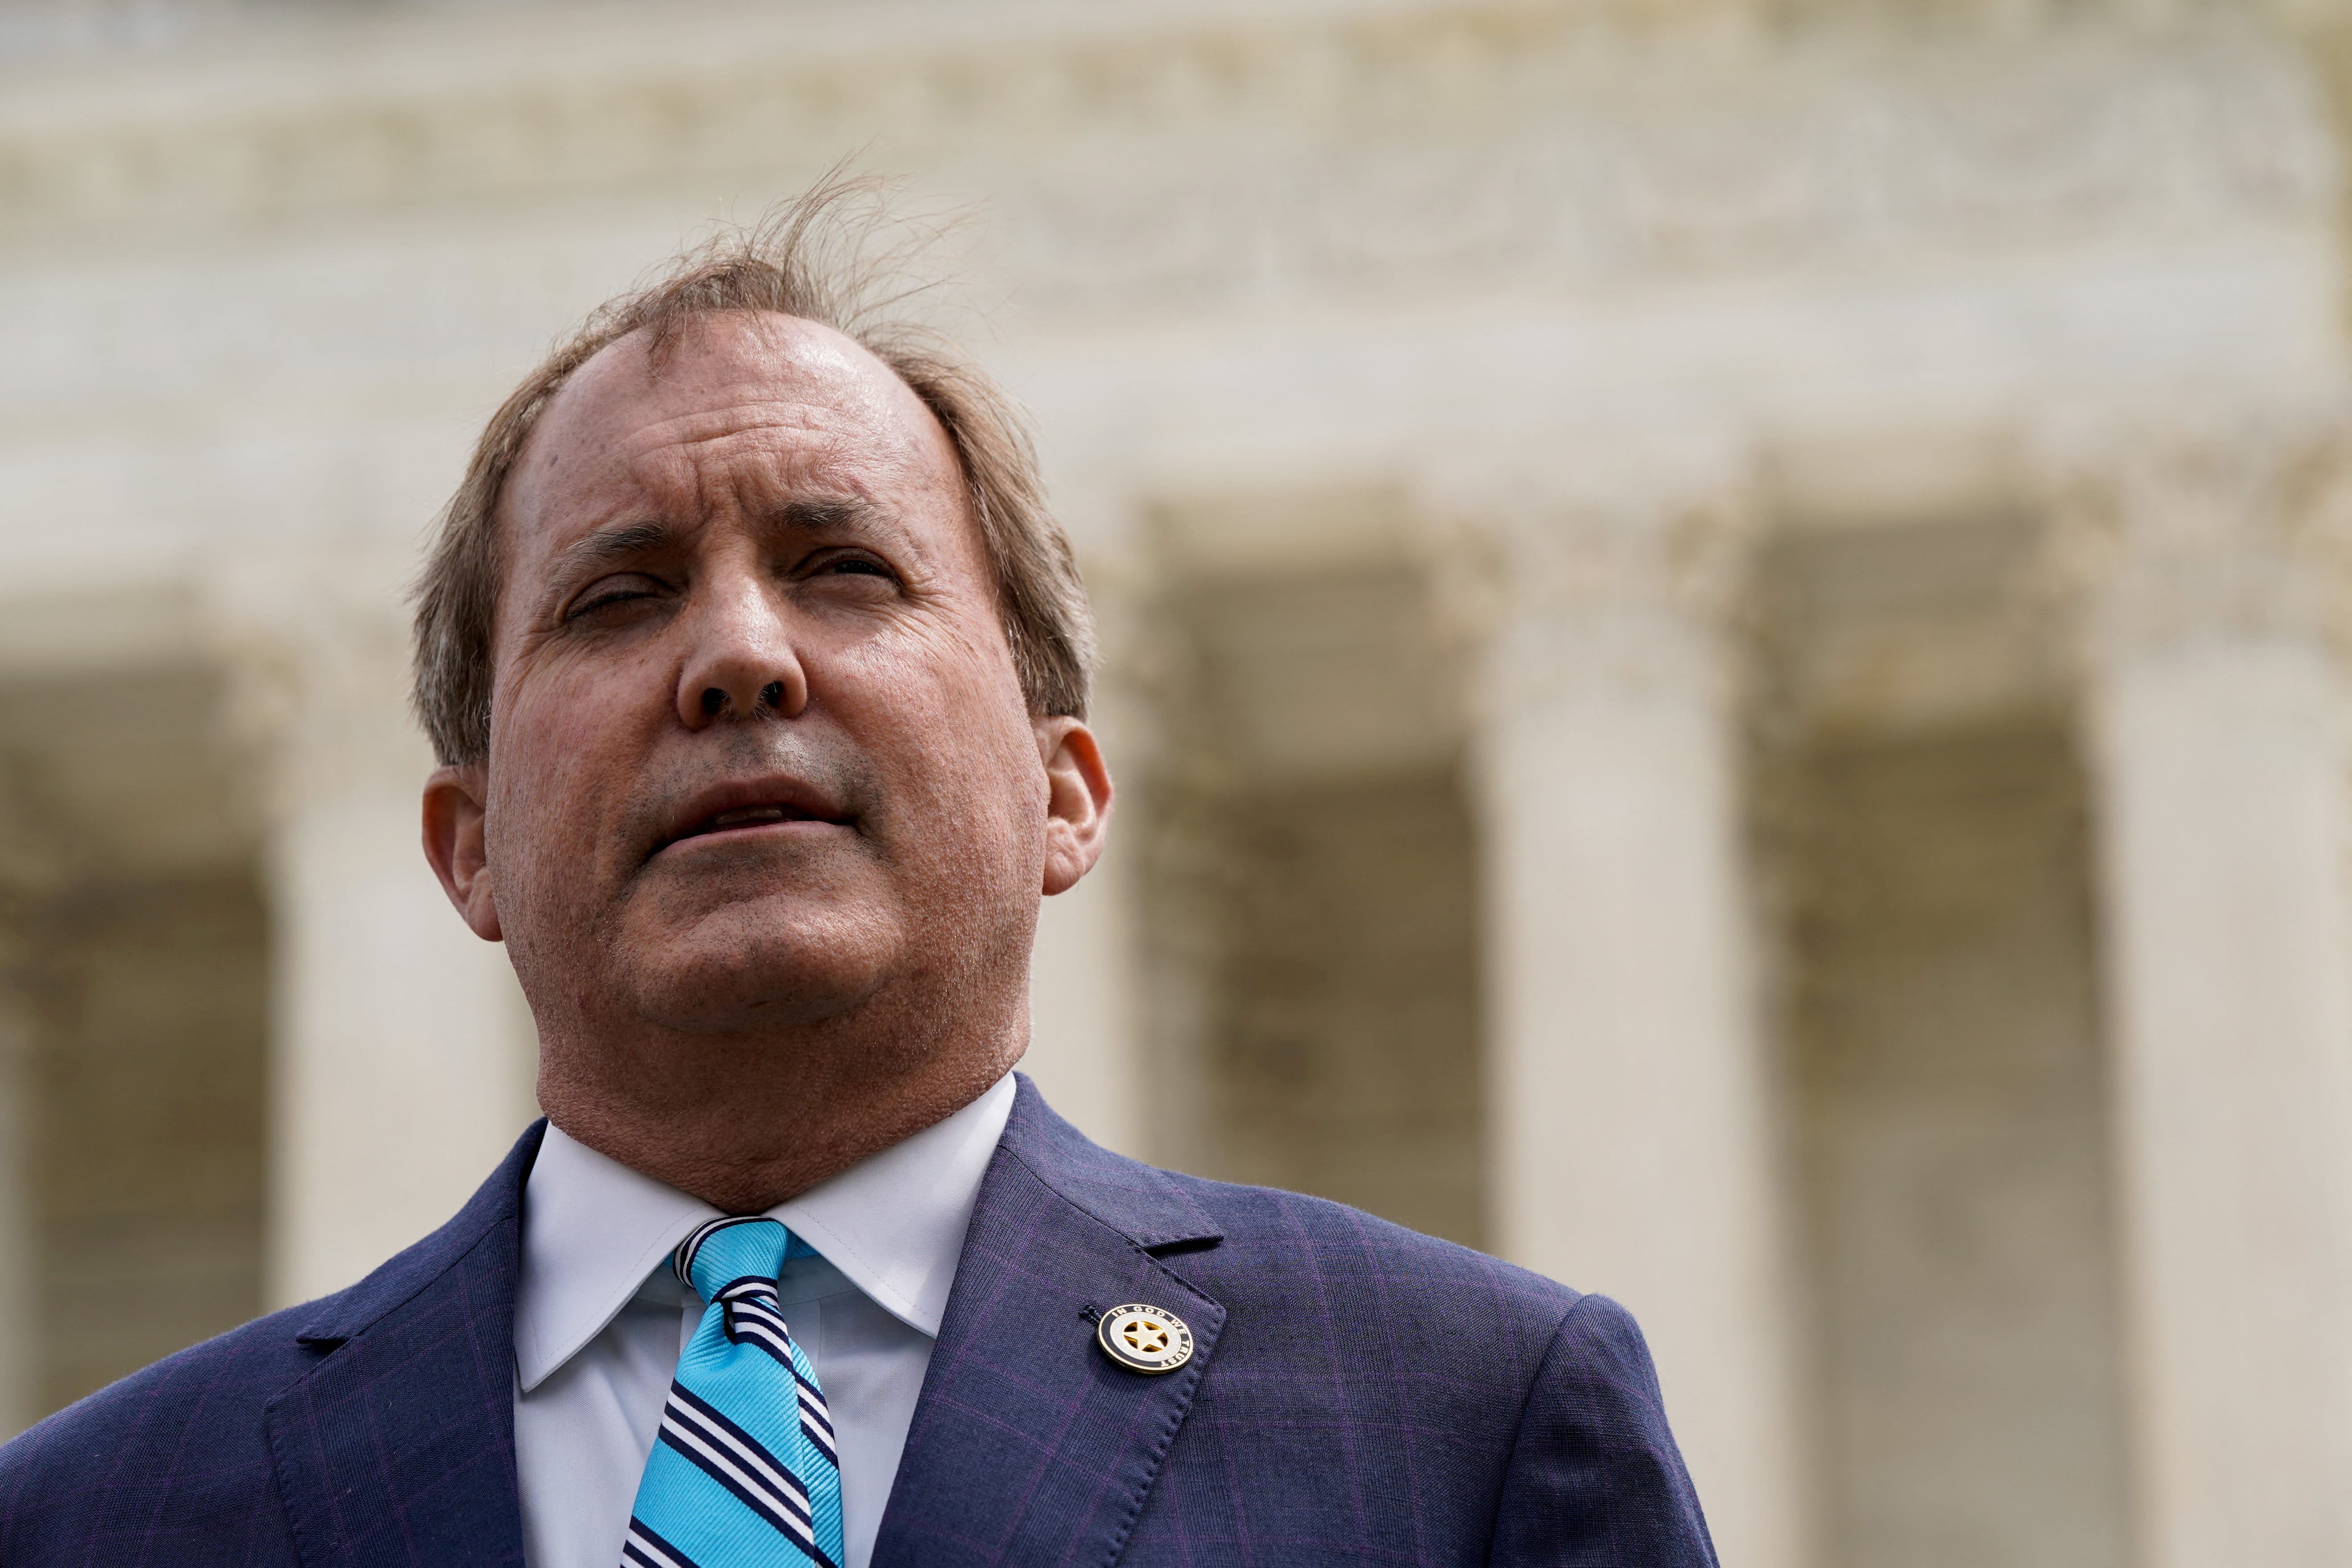 Texas Attorney General Ken Paxton Cleared of All Impeachment Accusations: 'Justice Has Been Served'